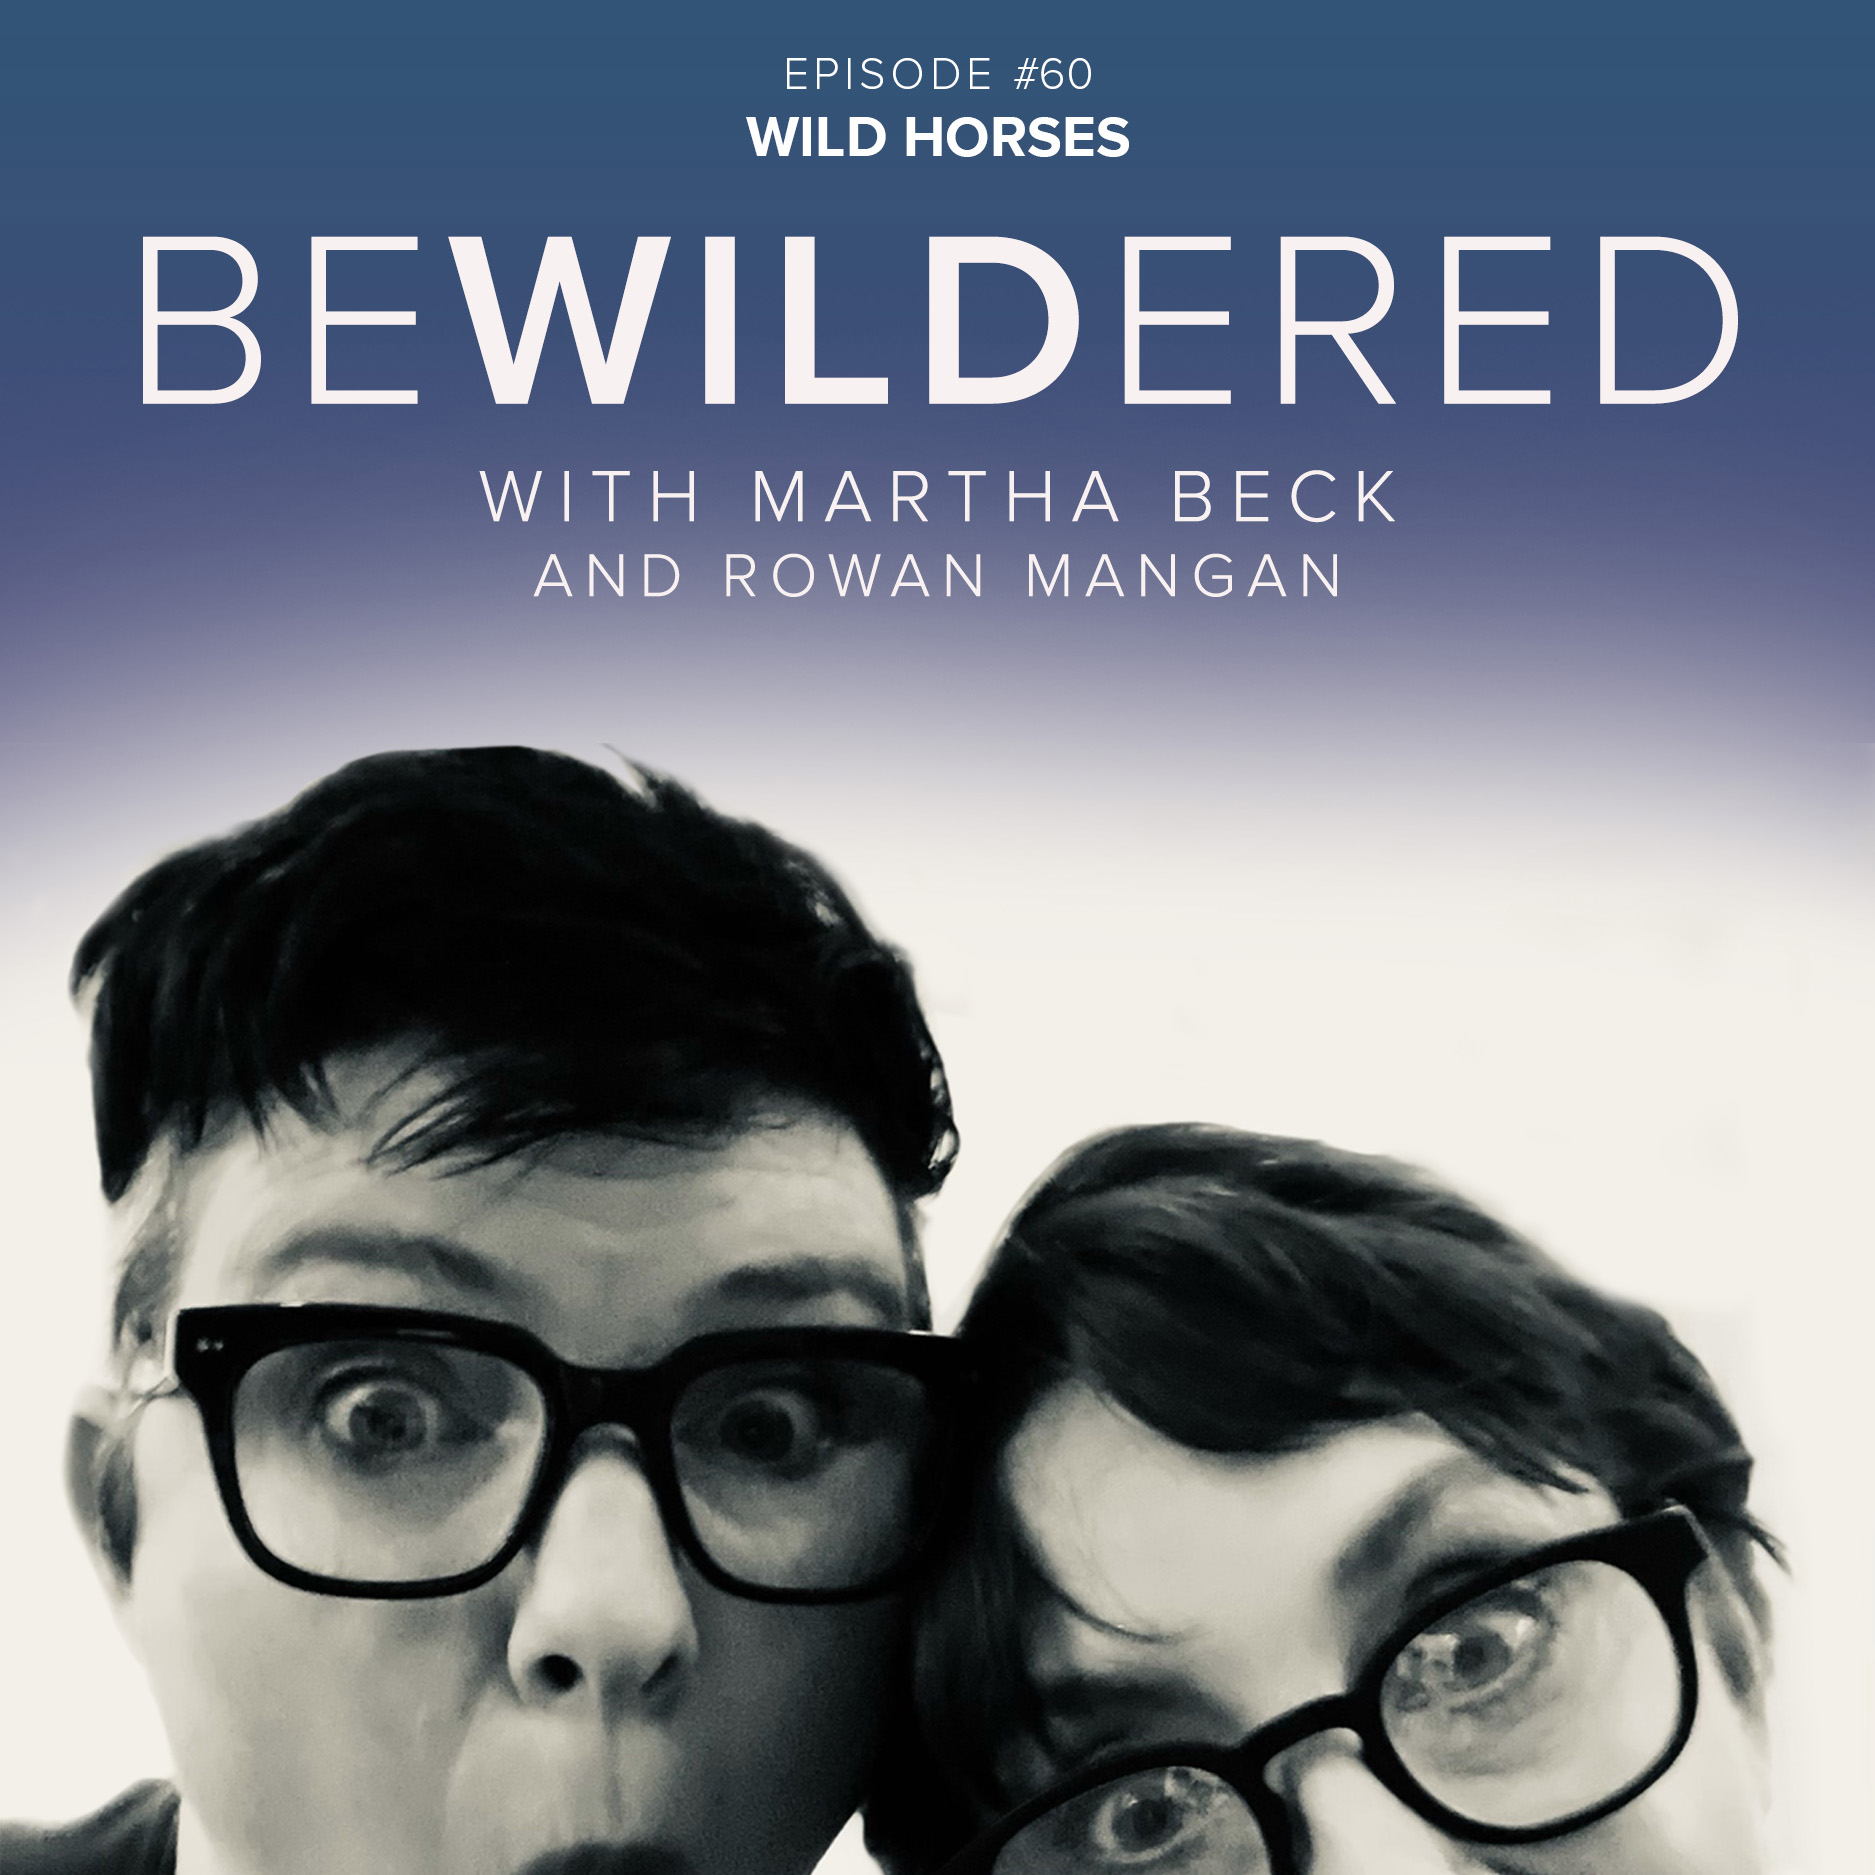 Image for Episode #60 Wild Horses for the Bewildered Podcast with Martha Beck and Rowan Mangan